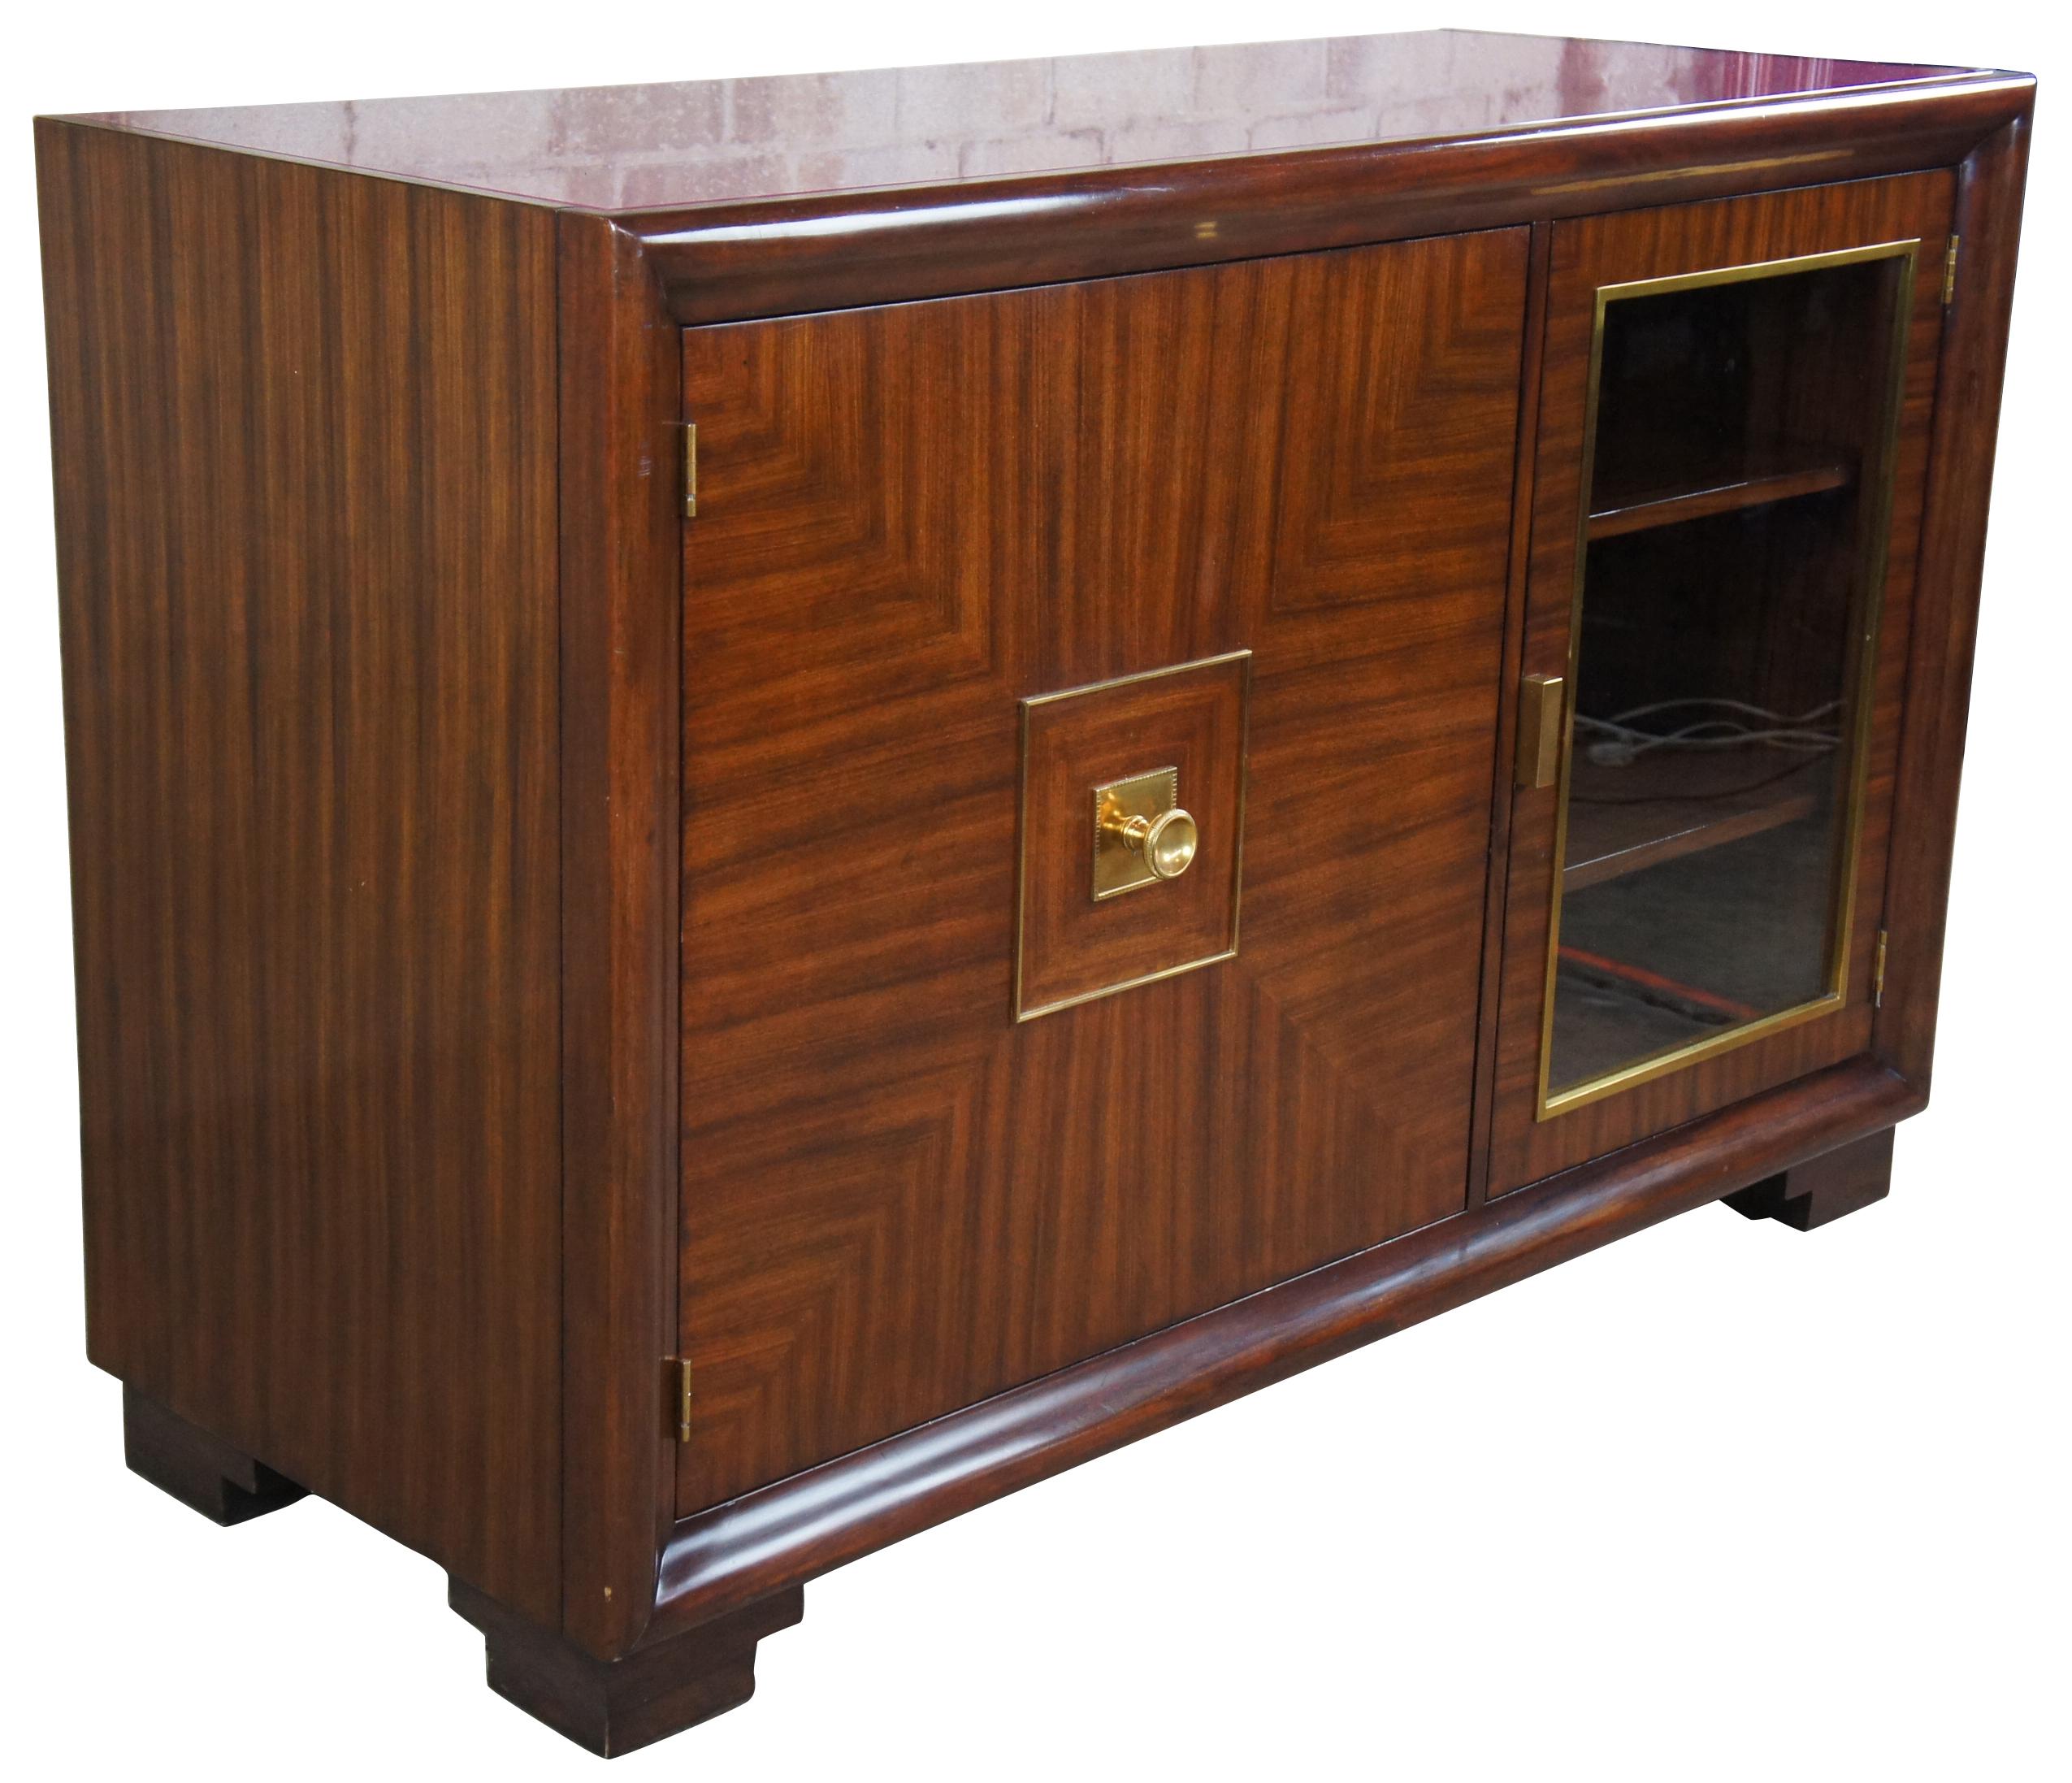 The Henredon Celerie Kemble Andrew Server features an asymmetric front divided into one large cabinet with drawers and a glass front. Made from rosewood veneers that add a geometric touch on the server front. The top is covered with a maroon glass